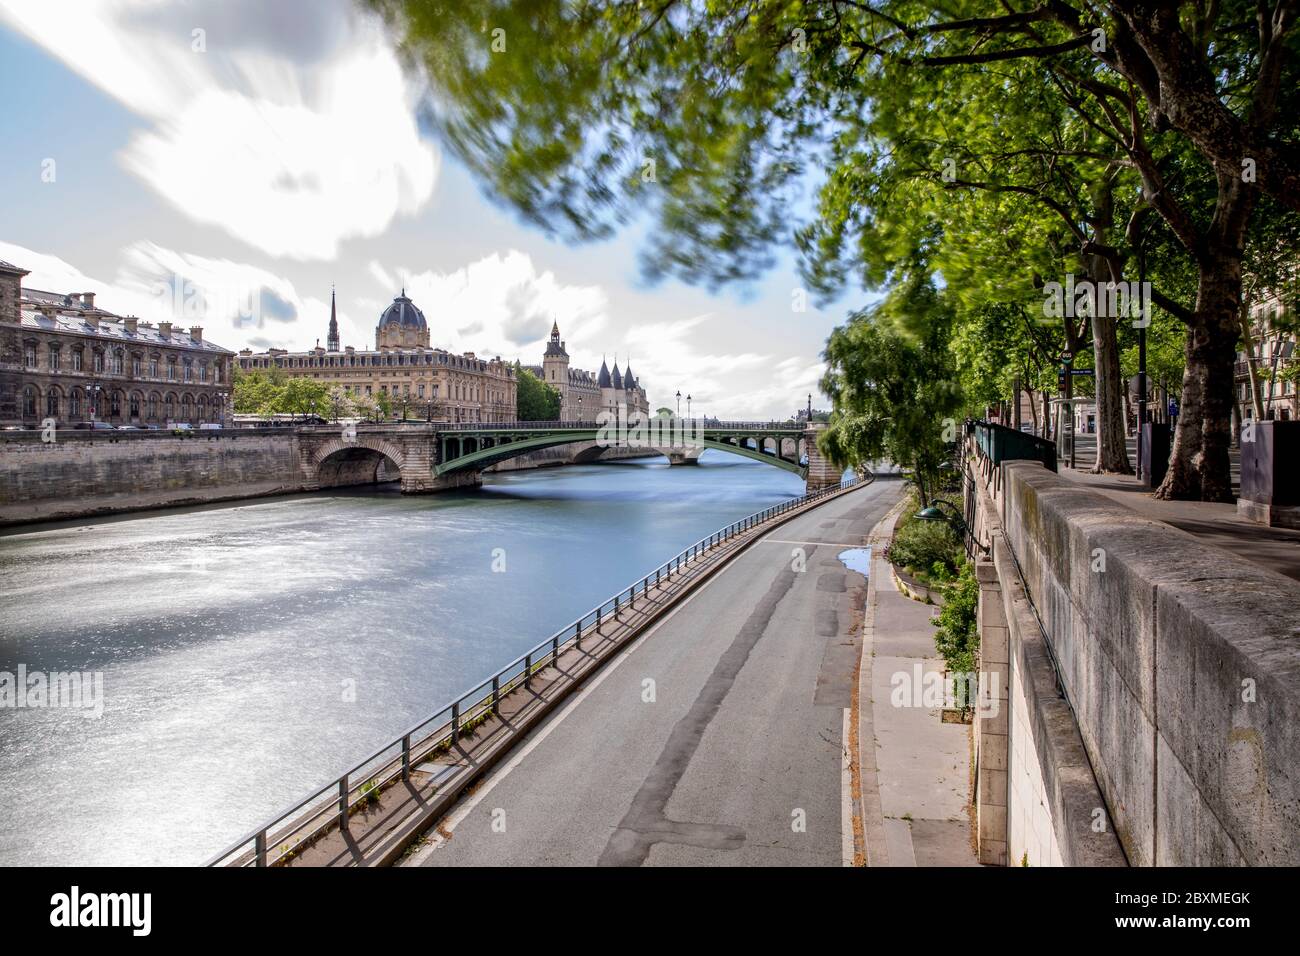 Paris, France - May 1, 2020: View of the Conciergerie, the Hotel Dieu and the bridges over the Seine during the containment measures due to the corona Stock Photo